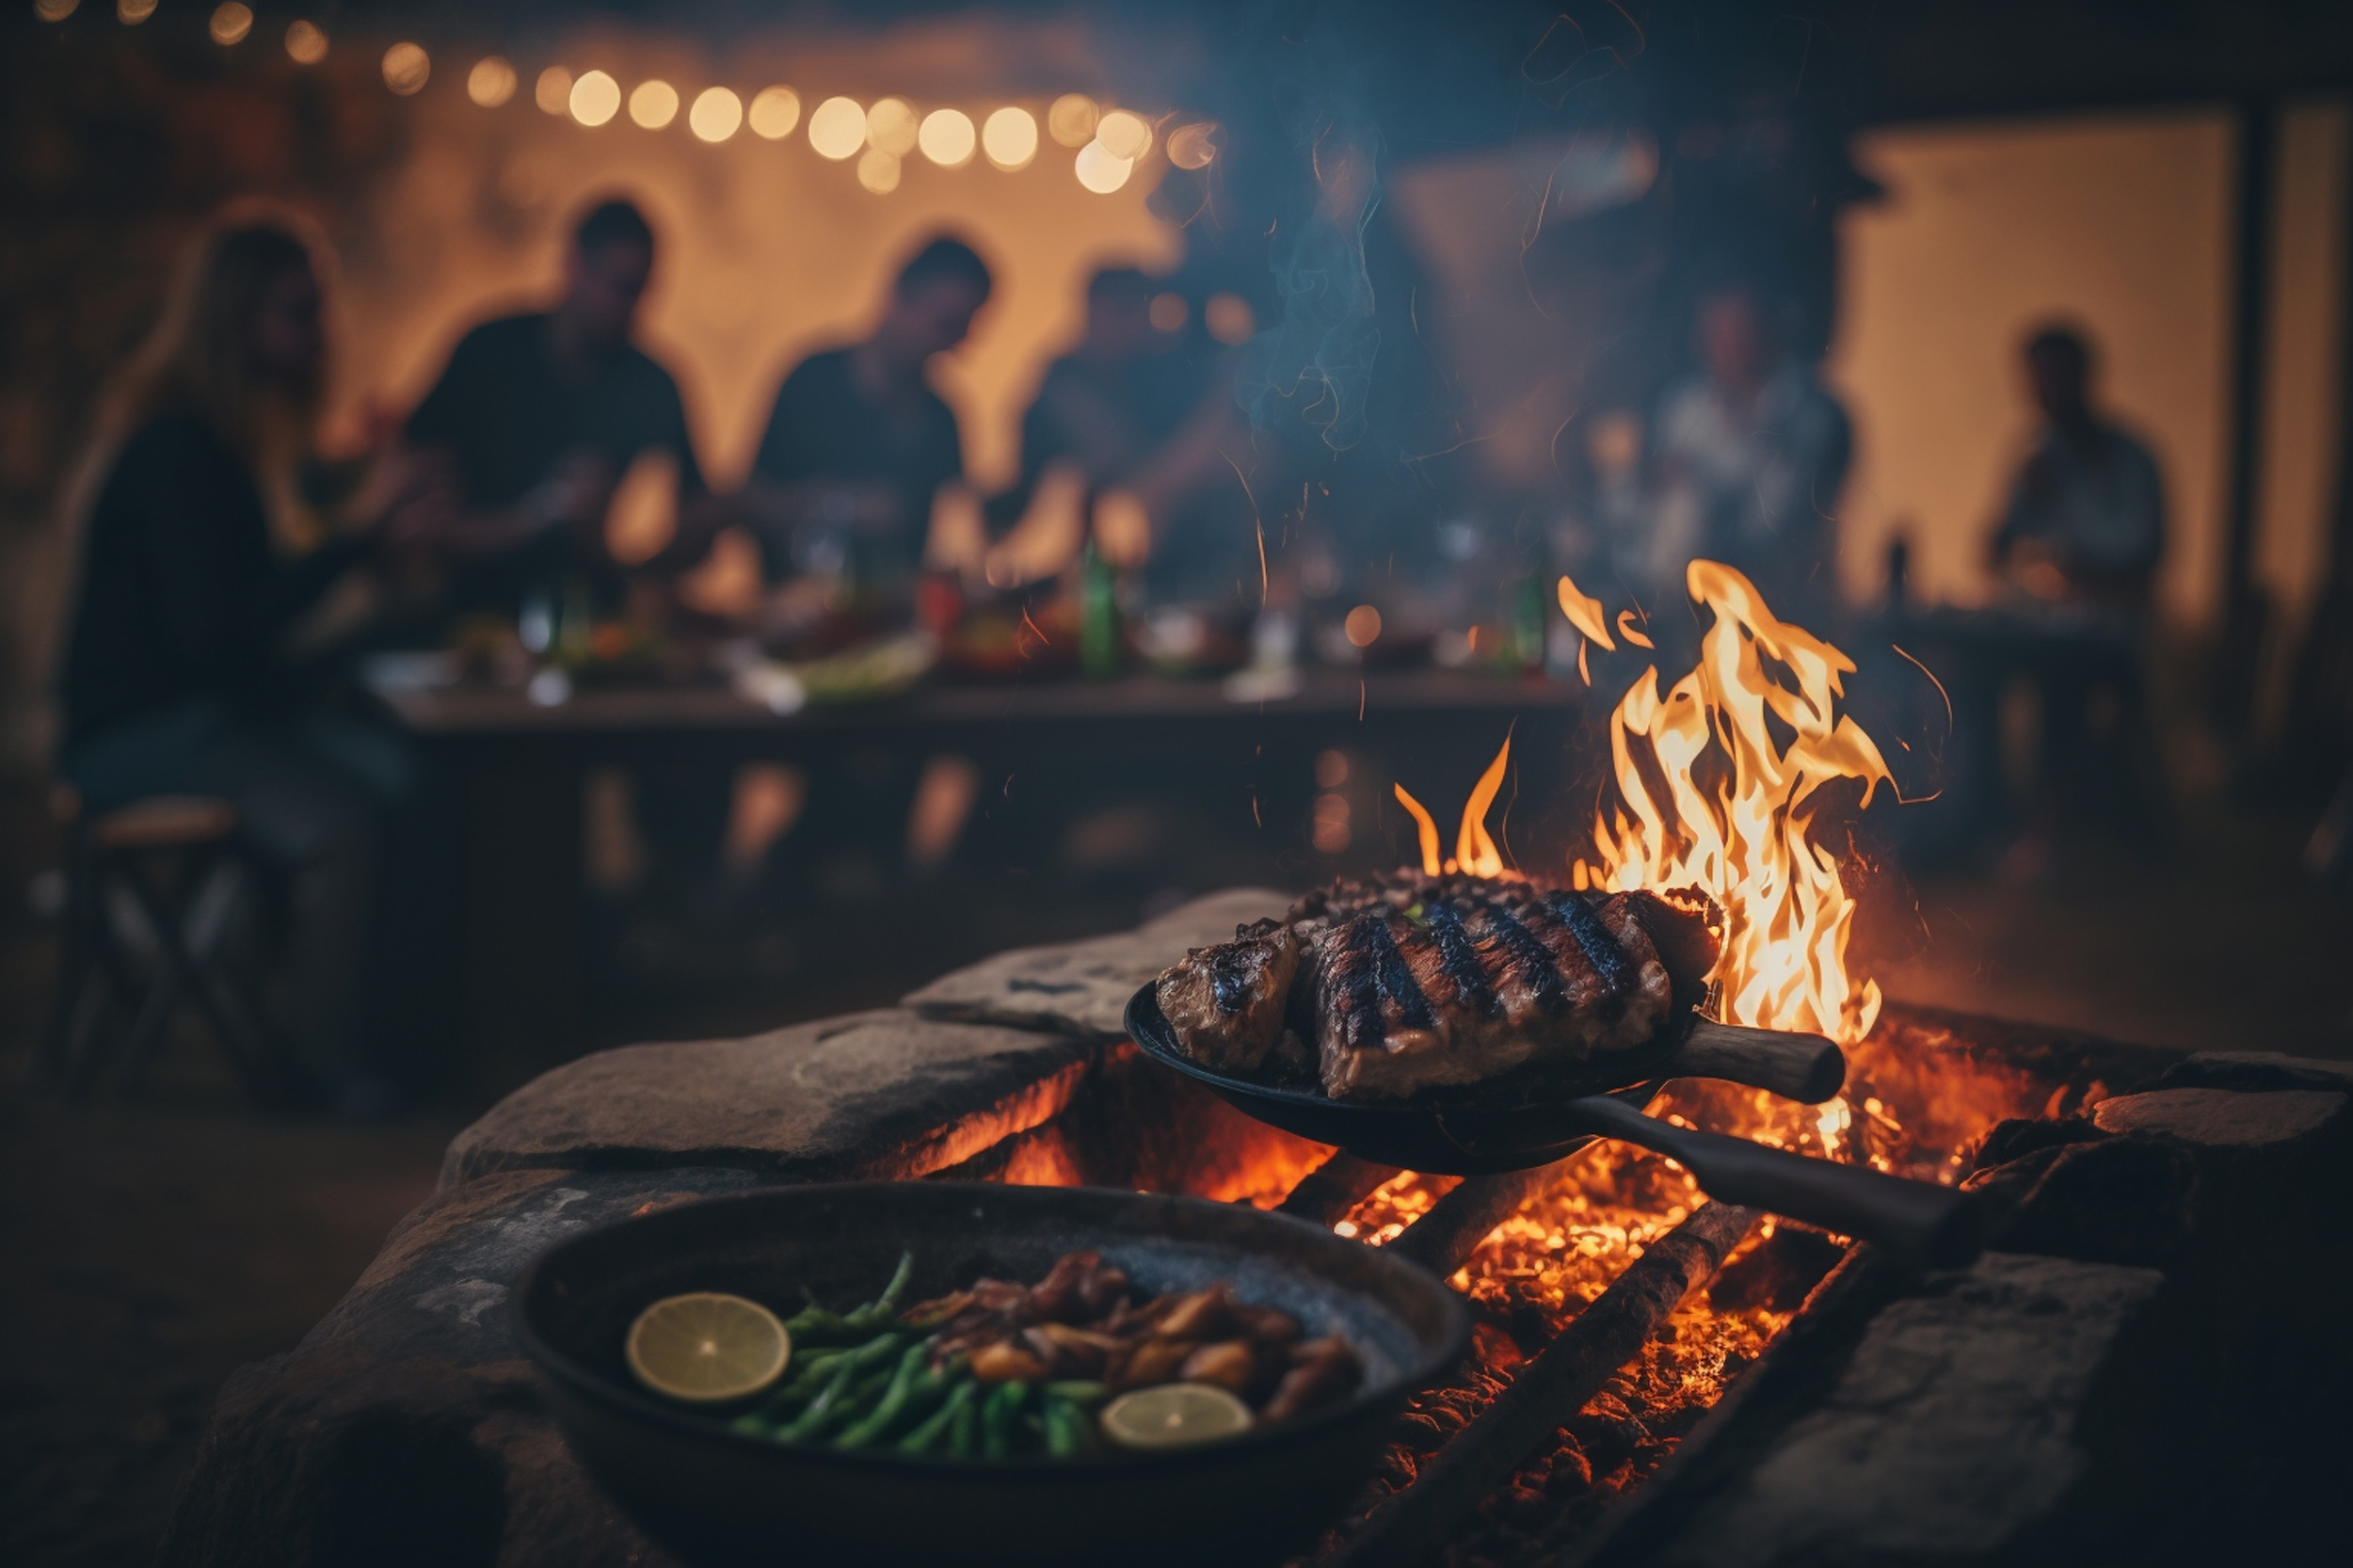 South African cuisine is known for its meaty BBQs, blending Eastern spices with European dishes.